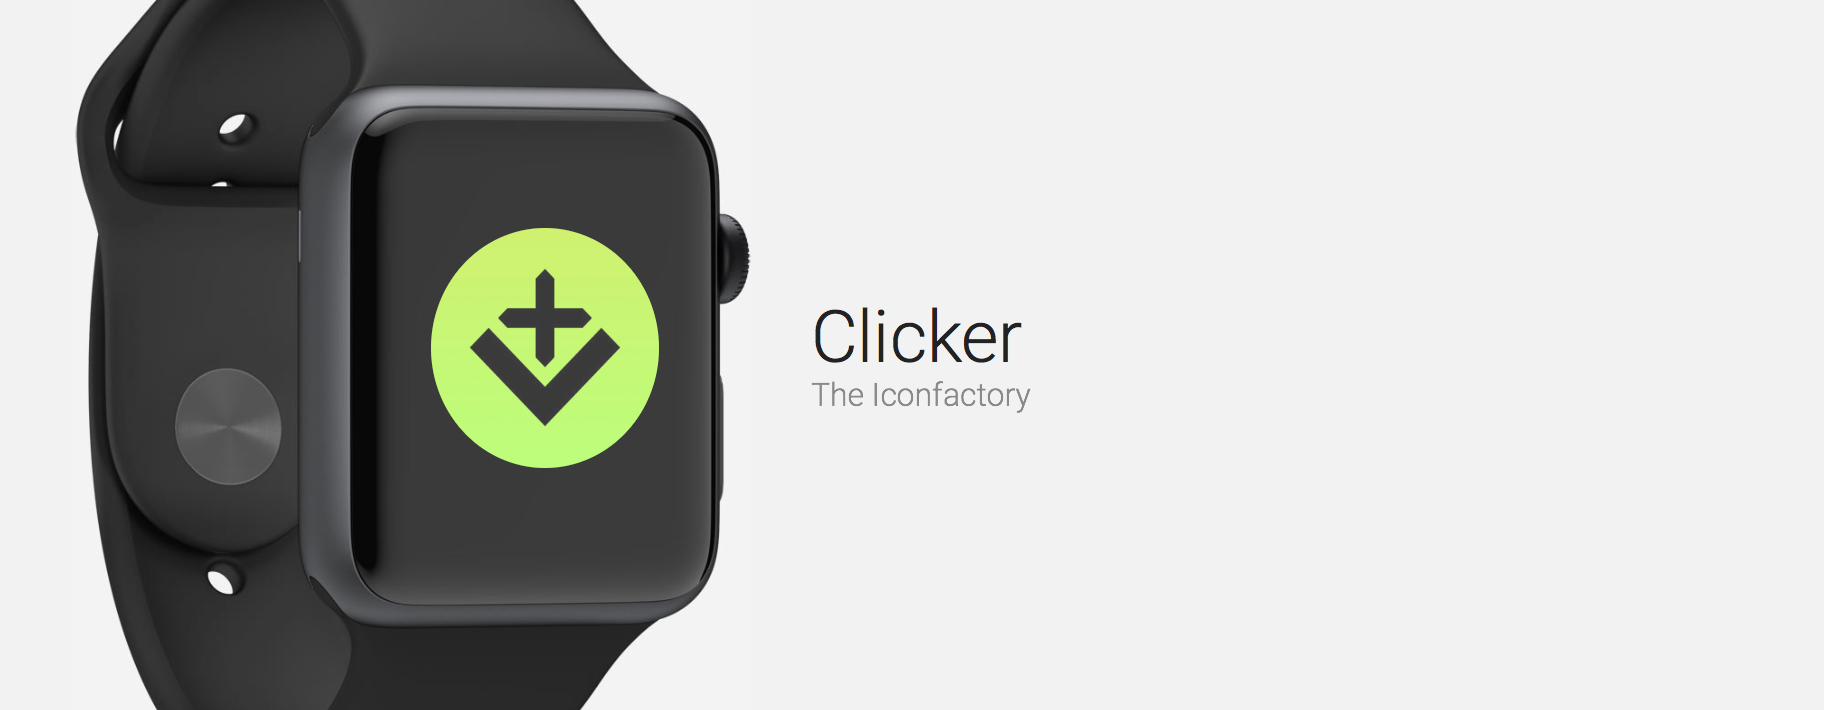 Clicker is the Ultimate Counter for Your Apple Watch